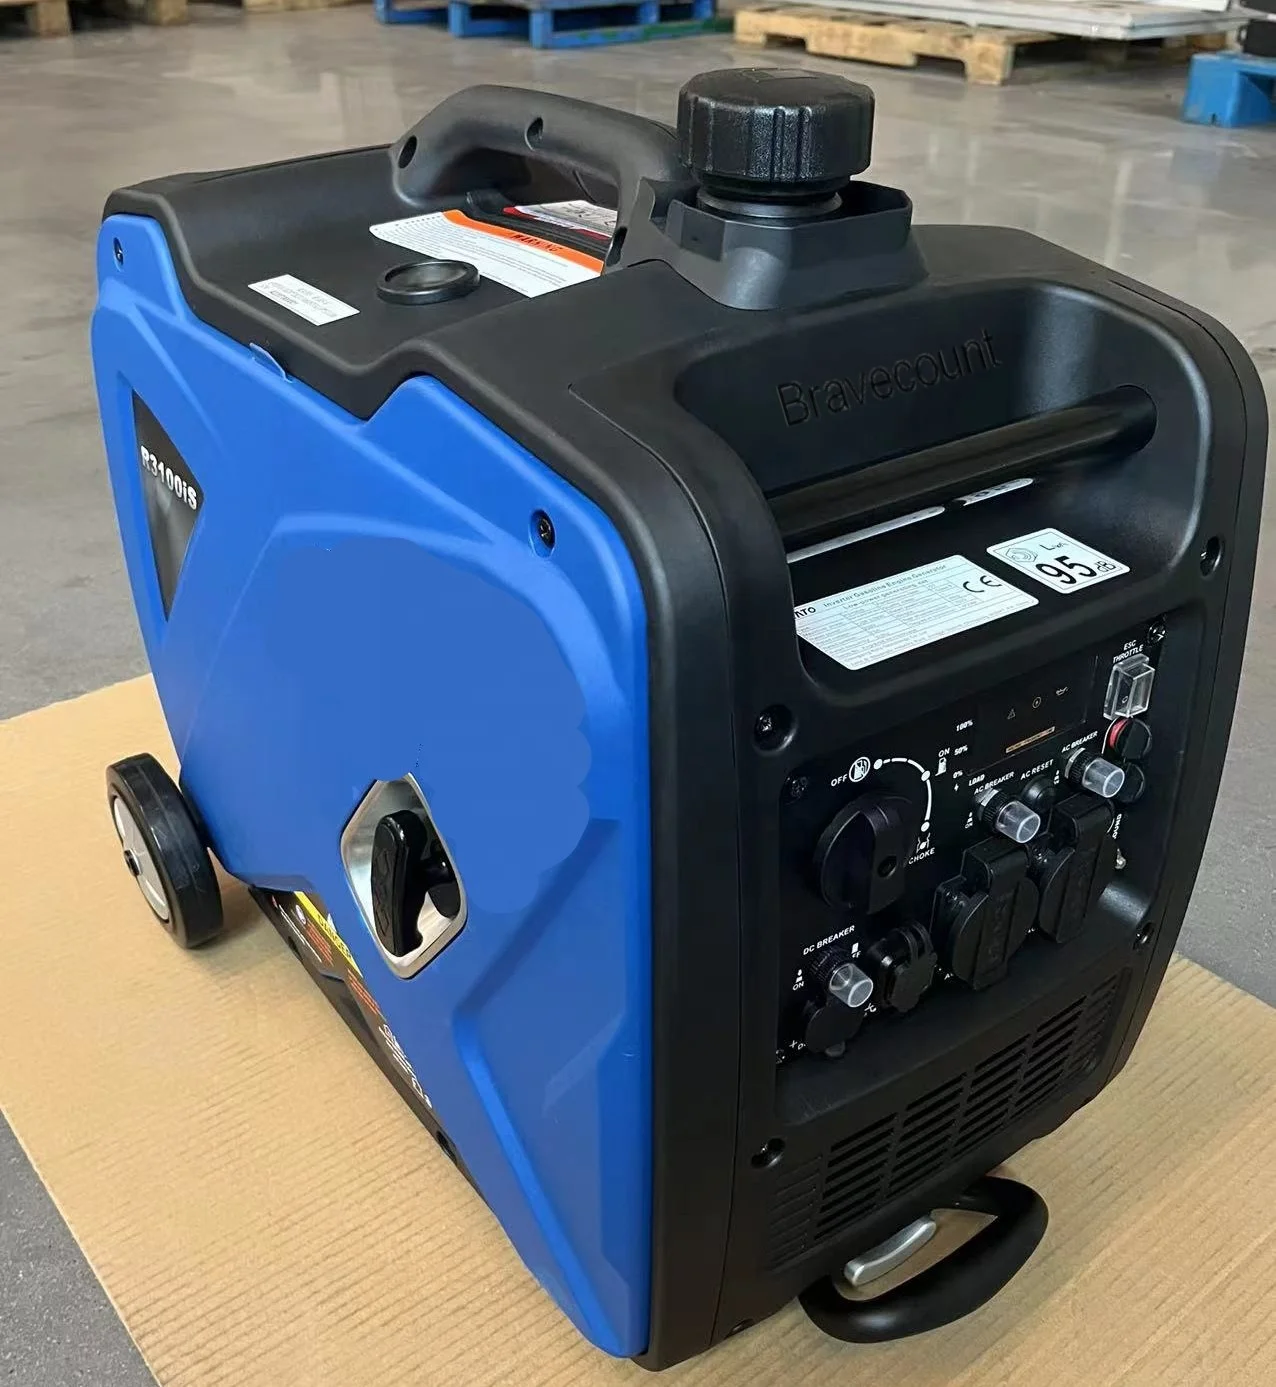 Rated 3kw Max 3.3kw Recoil Start Ac220v 50hz Dc Inverter Gasoline Generator - 3kw Generator,3kw Gasoline Generator,3kw Inverter Gasoline Generator Product on Alibaba.com